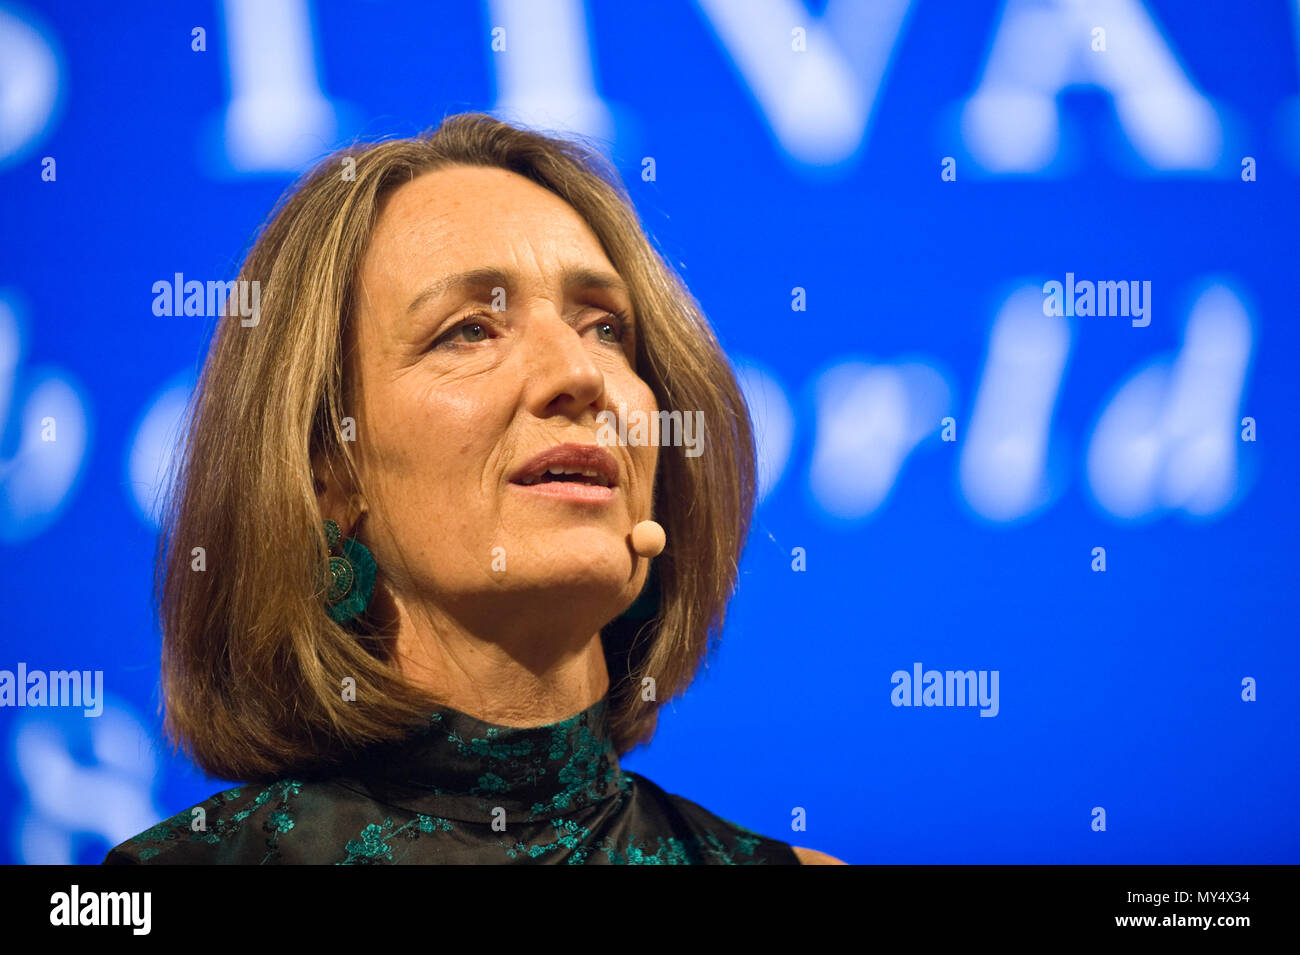 Francine Stock speaking on stage at Hay Festival 2018 Hay-on-Wye Powys Wales UK Stock Photo